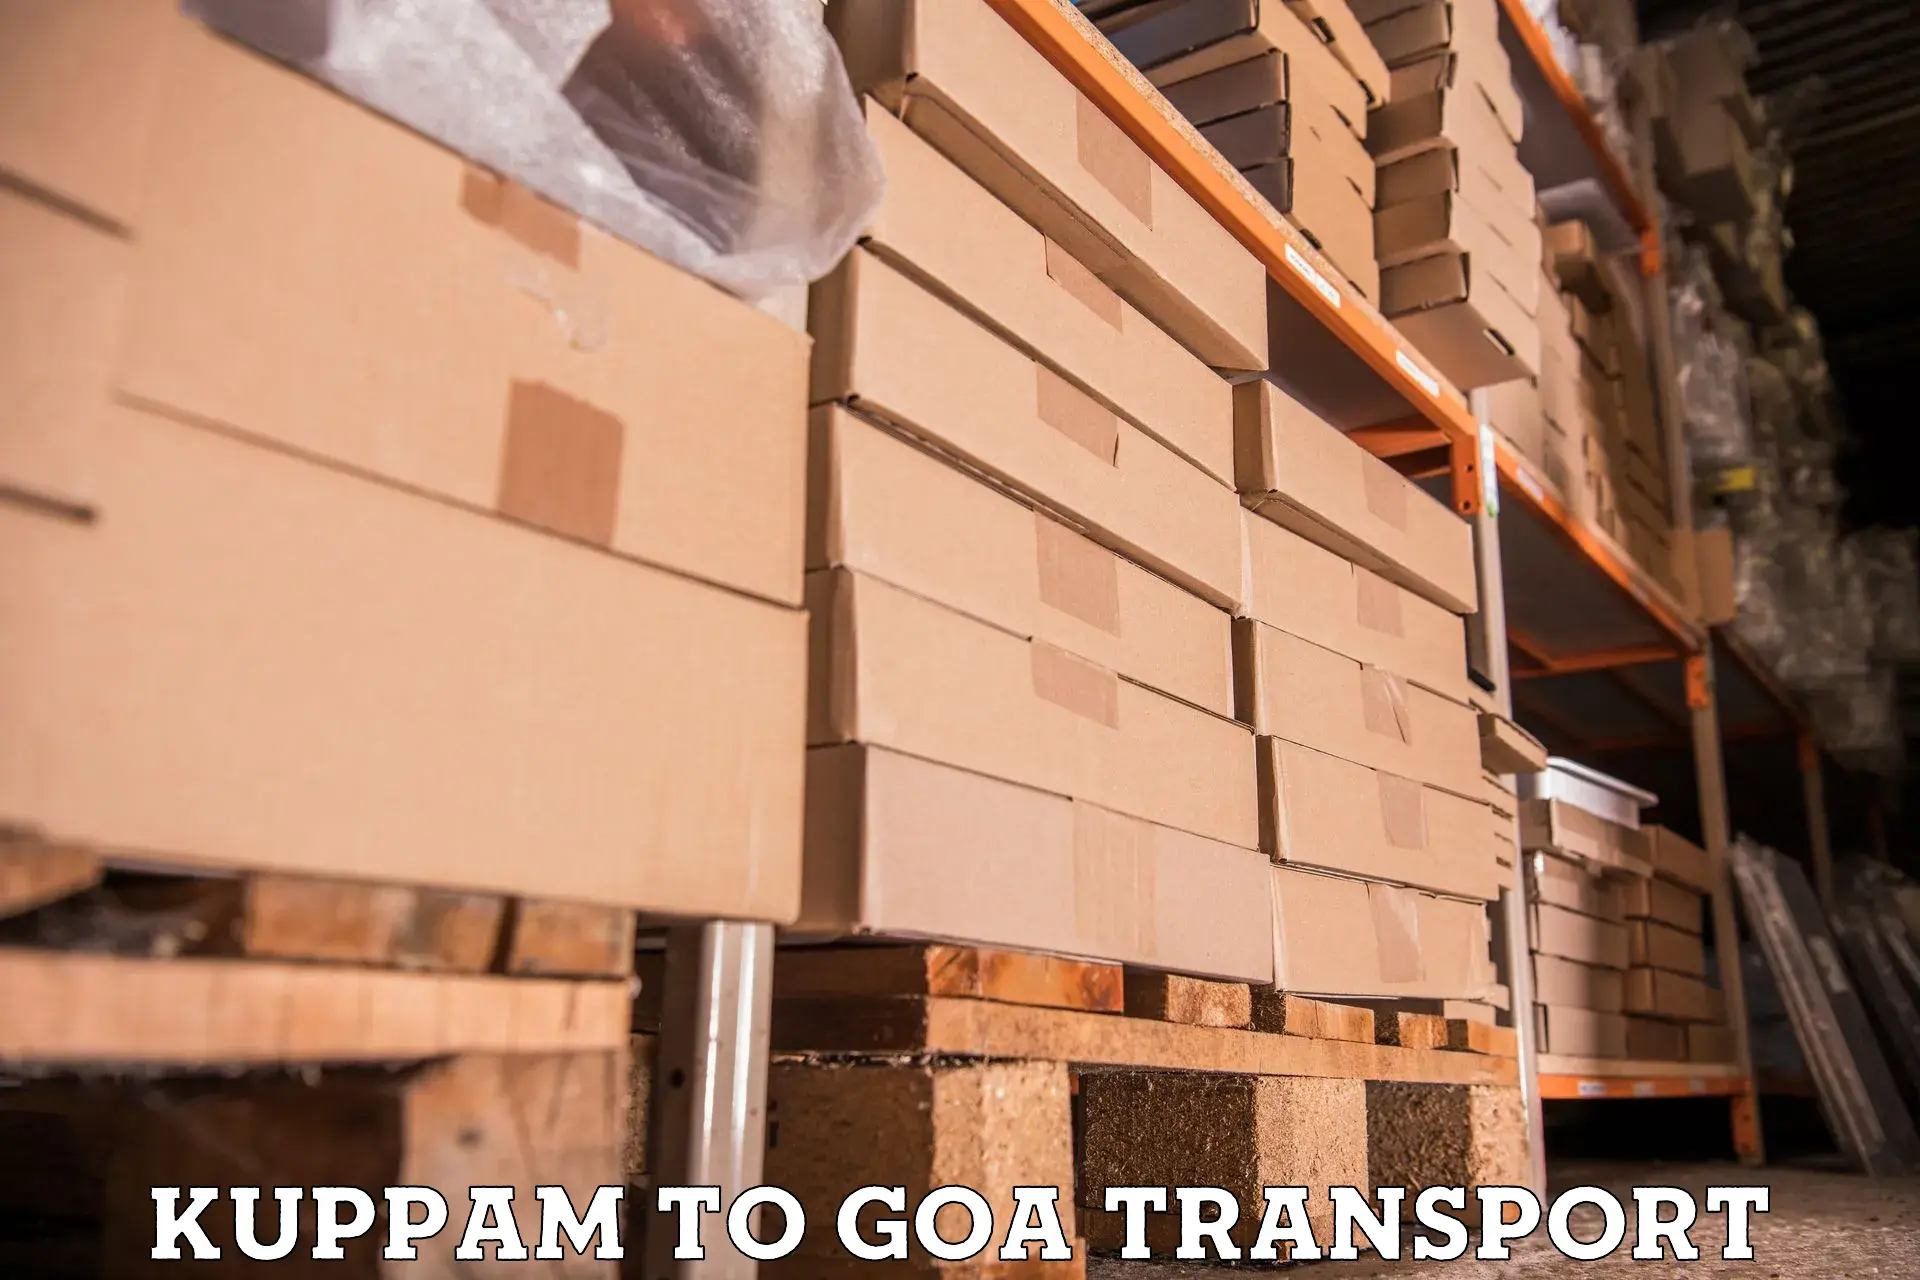 Container transport service Kuppam to Ponda